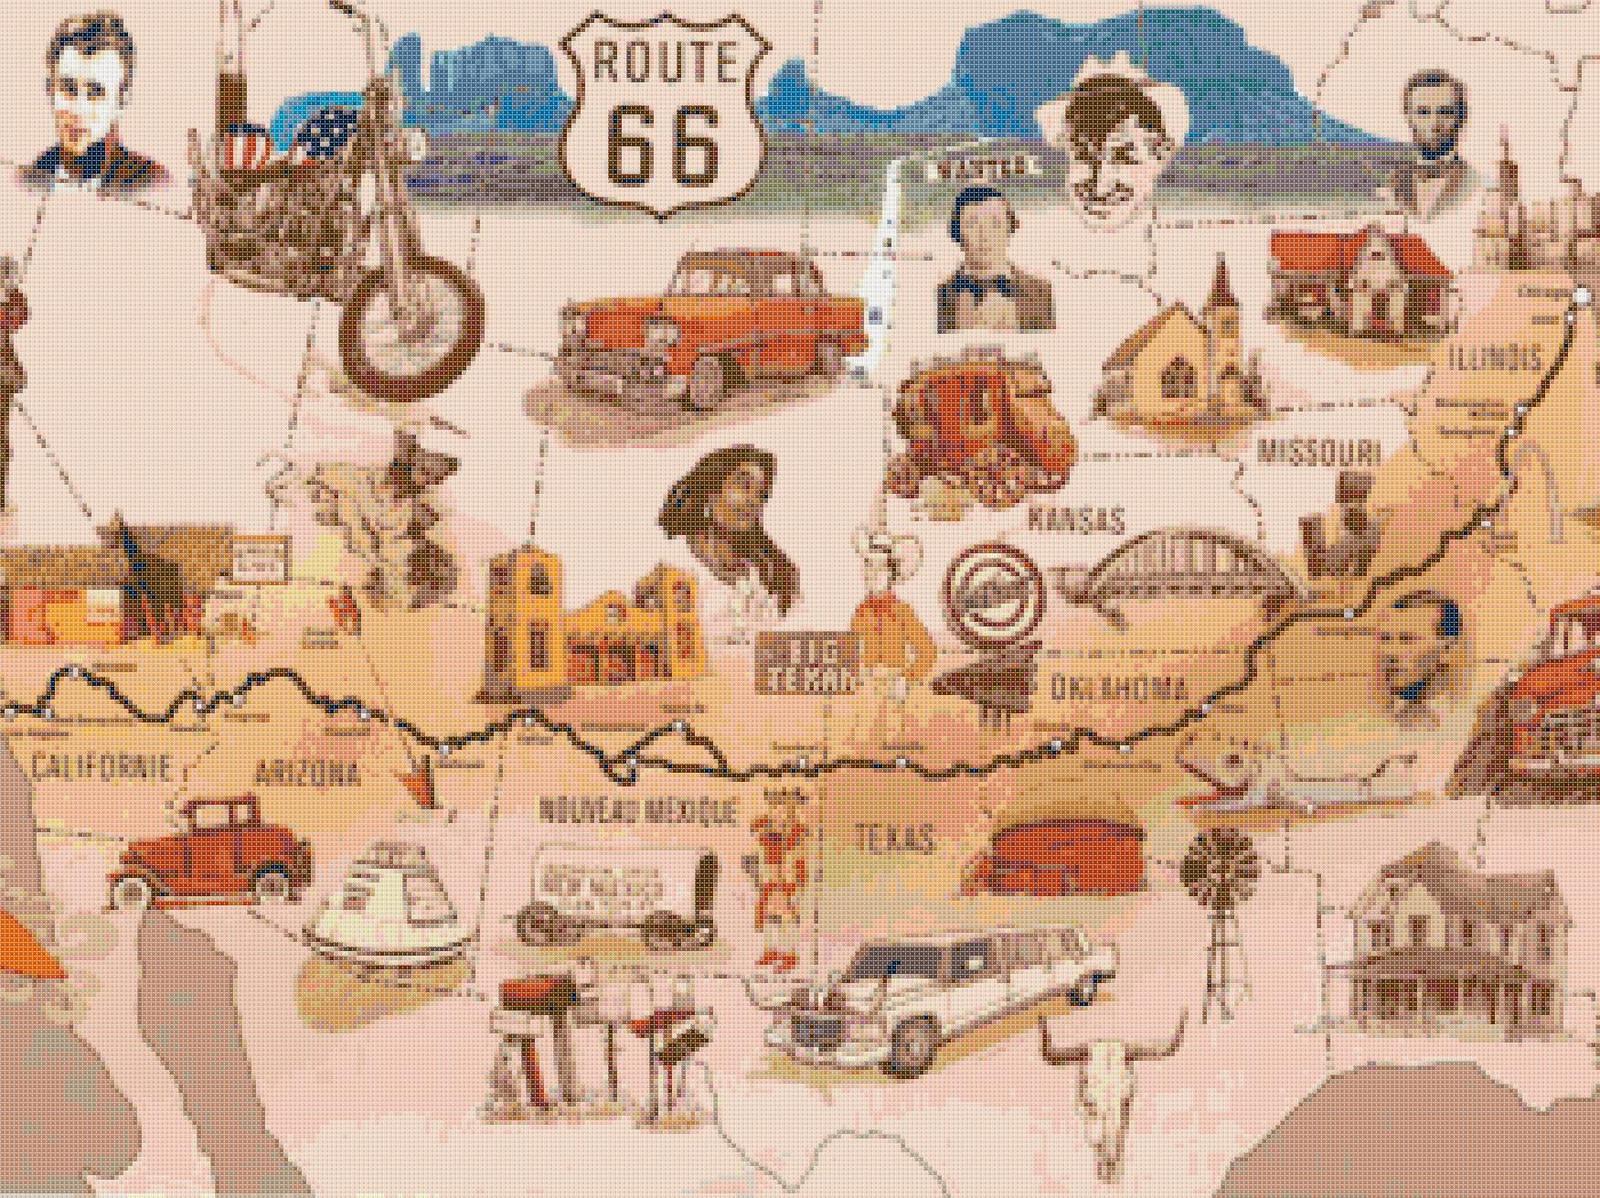 Counted cross stitch pattern american route 66  pdf 350x262 stitches BN1913